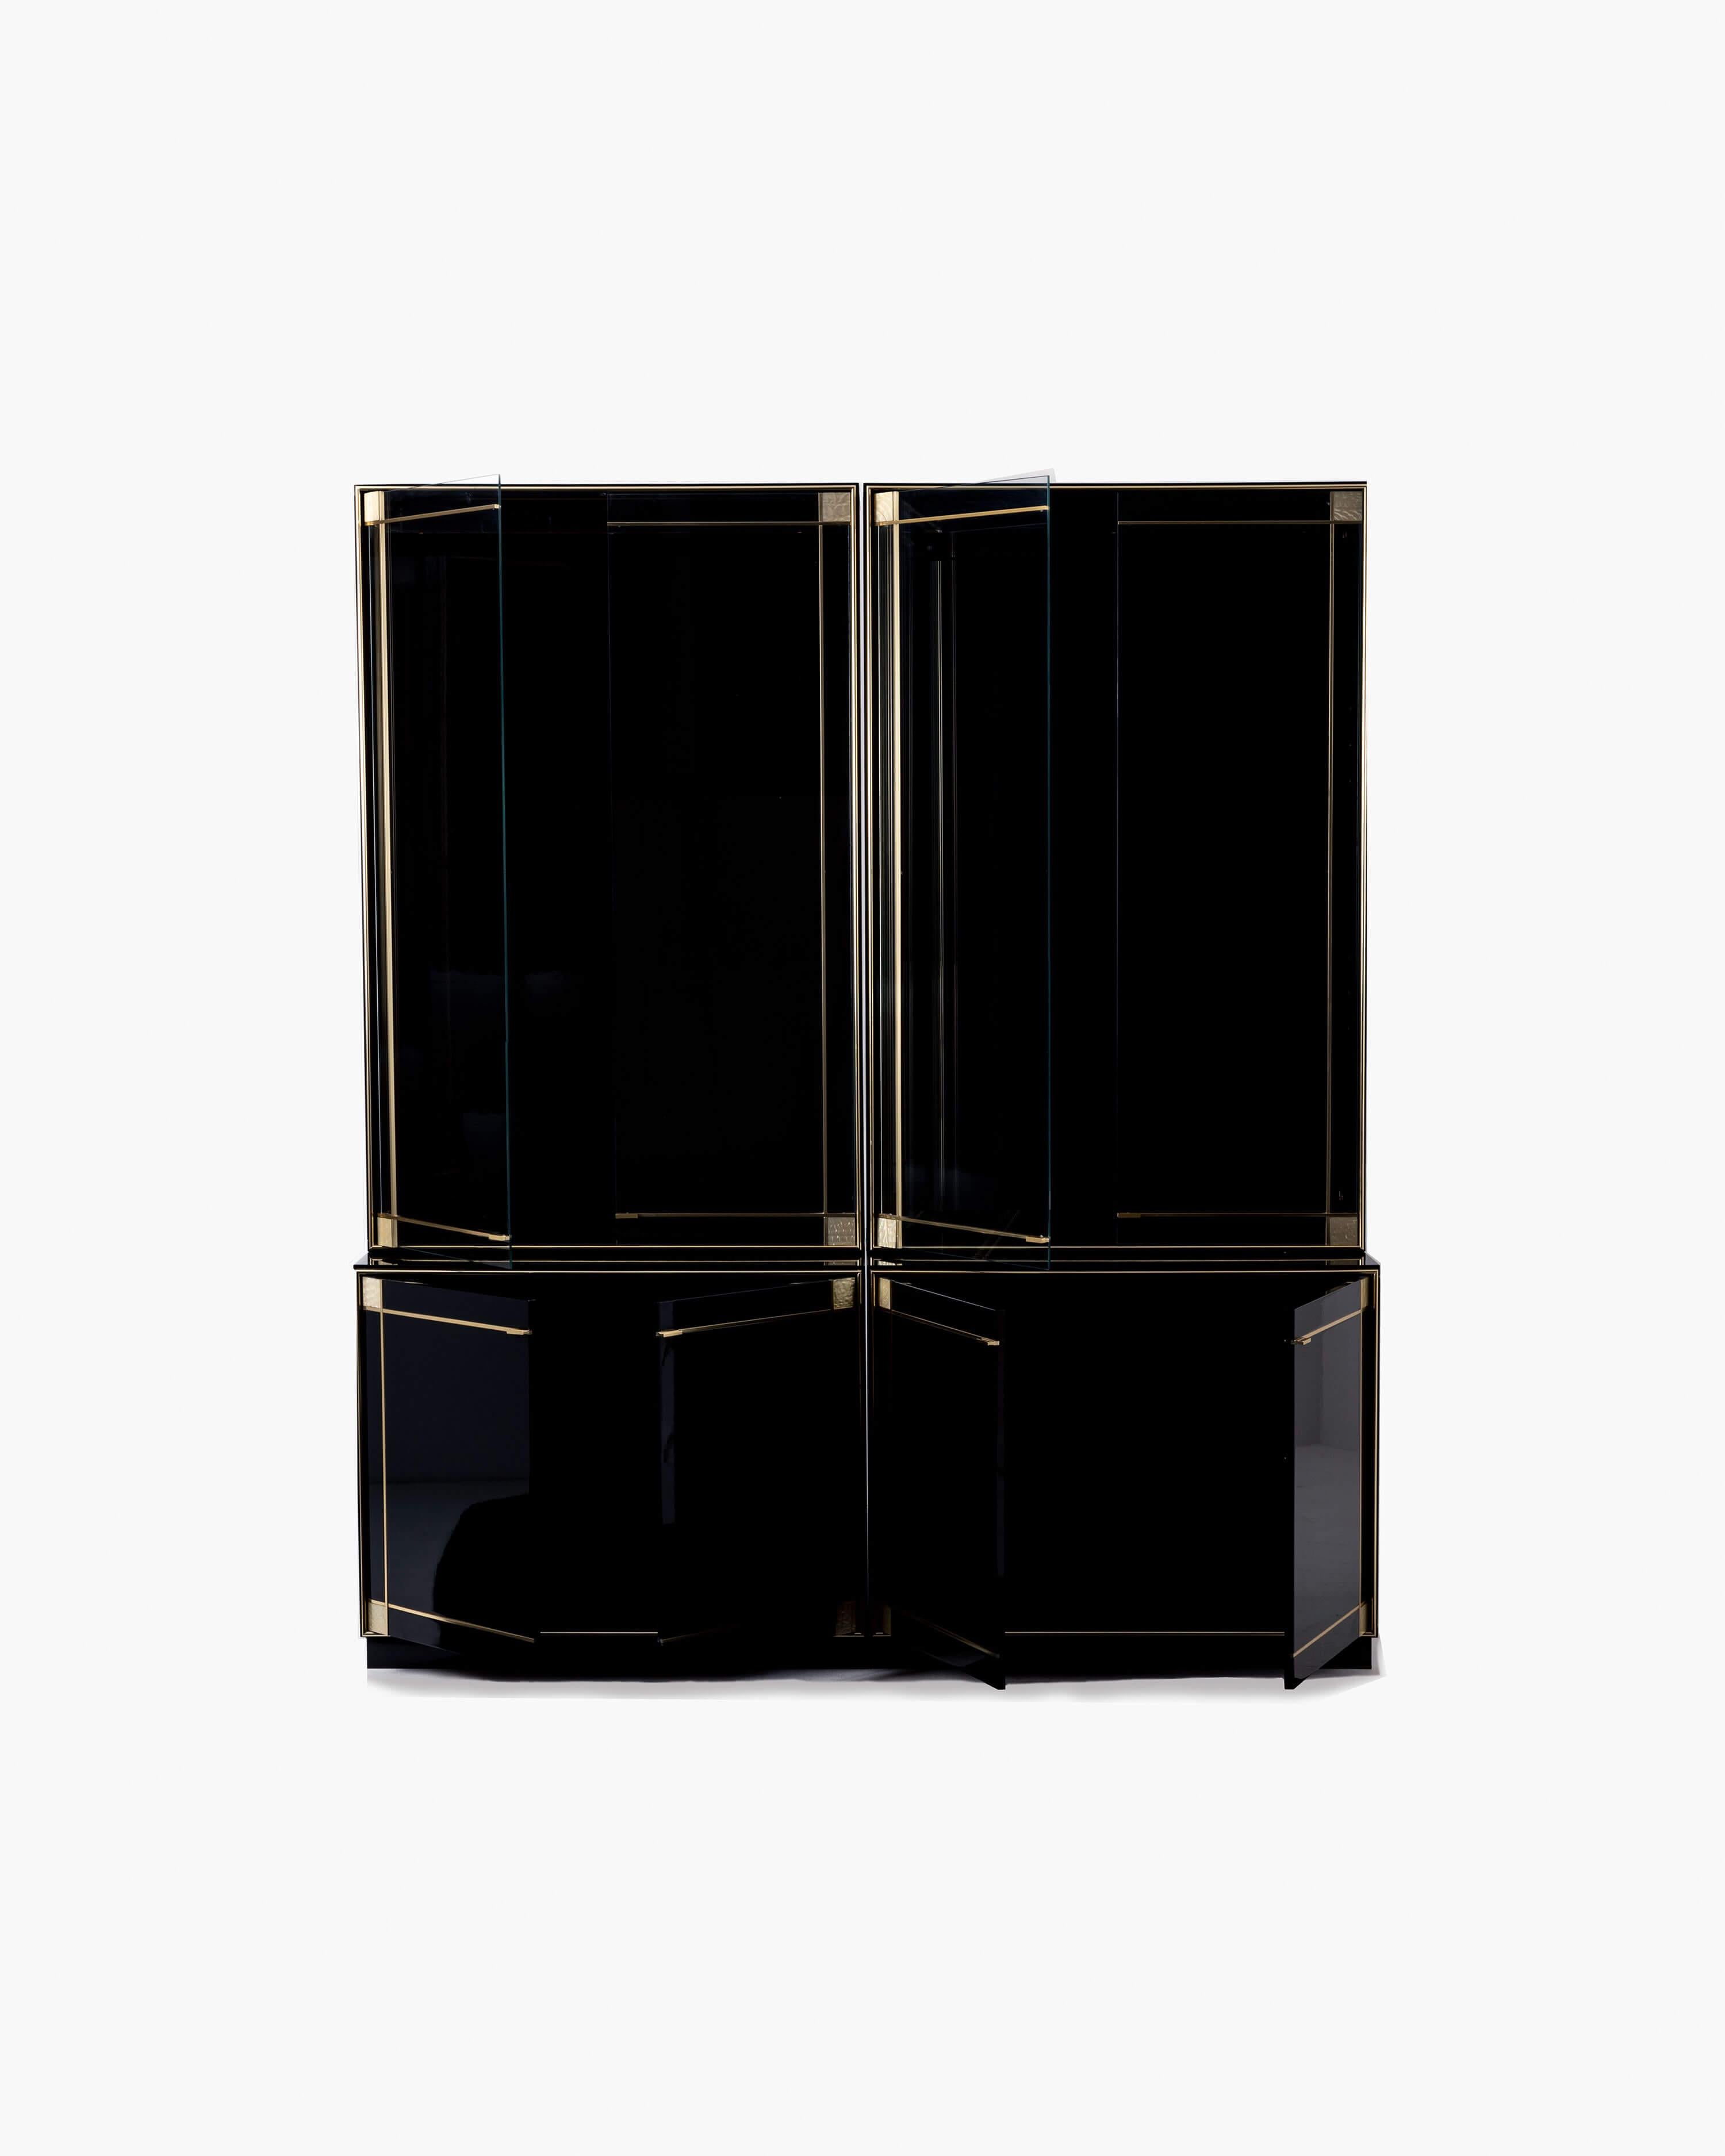 French Pair of Vitrines for Roche Bobois in Black Lacquer by Pierre Cardin, circa 1980 For Sale